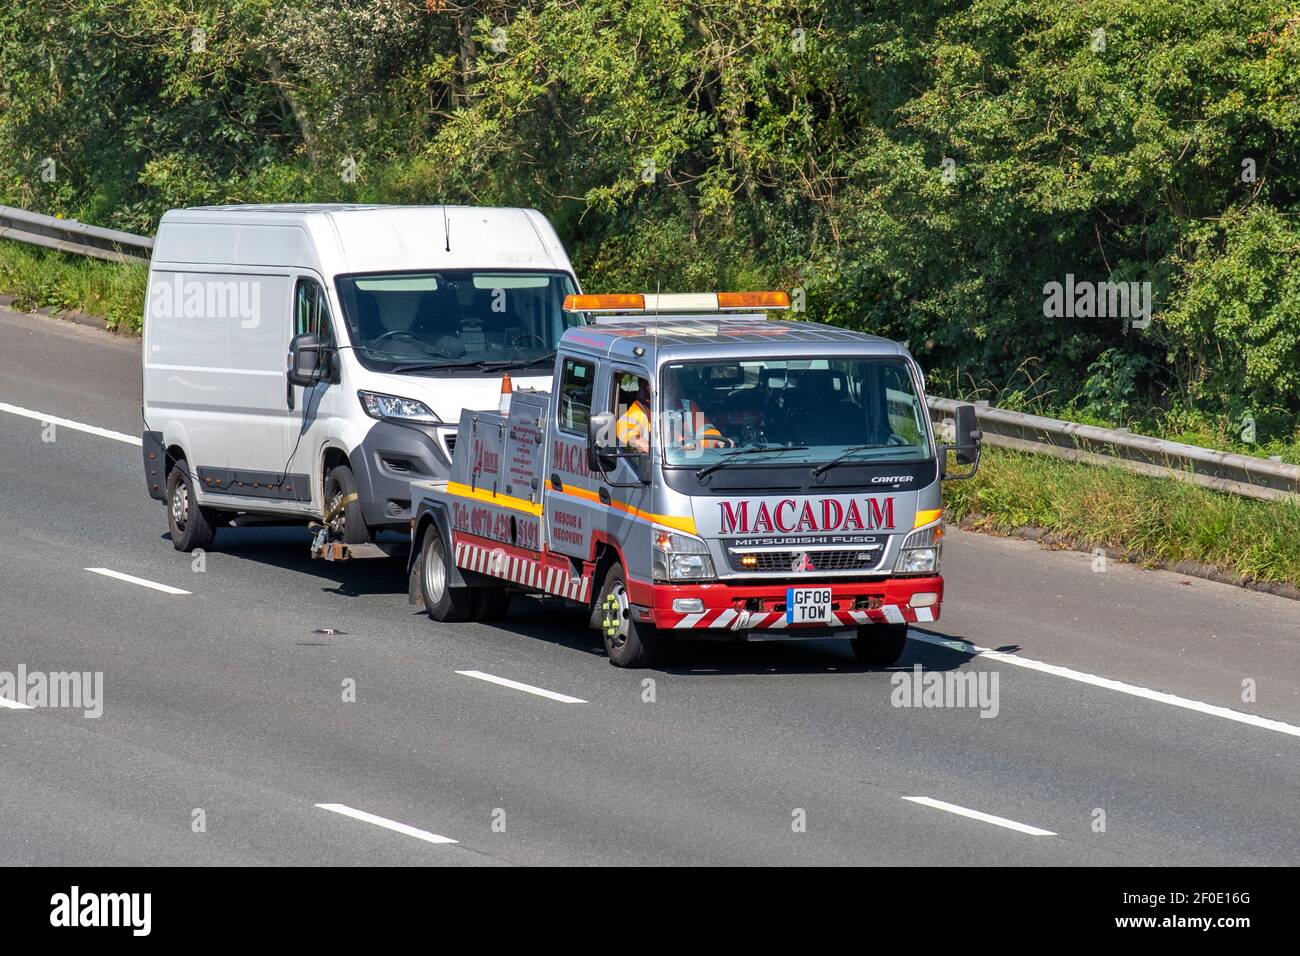 Macadam Canter Rescue and recovery; Auto transporter, car transporter carrier; Motorway heavy bulk Haulage delivery trucks, haulage, 2008 Mitsubishi Fuso lorry, transportation, collection and deliveries, multi-car commercial vehicle carrier, truck UK Stock Photo